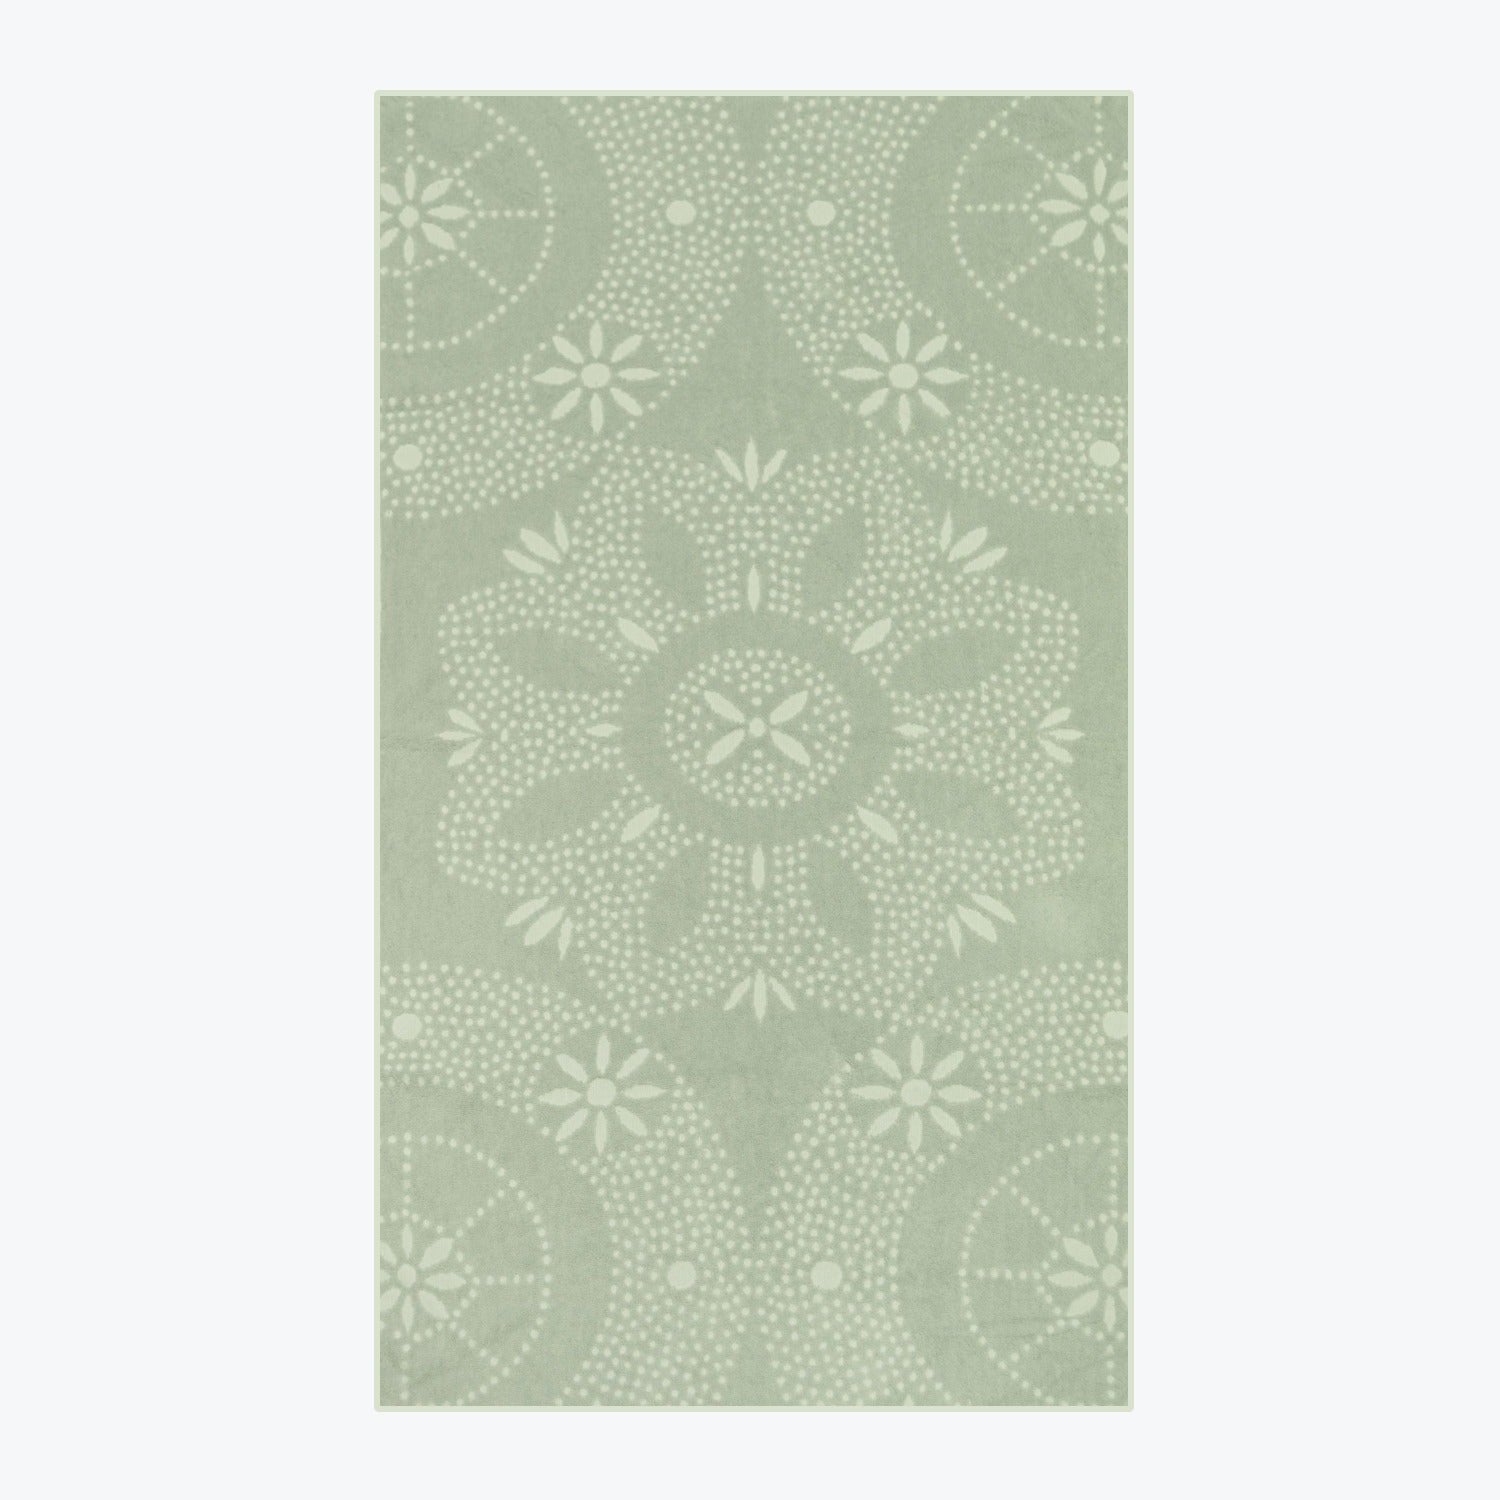 A birdseye view of the design of the Marrakesh Towel in Sage Green